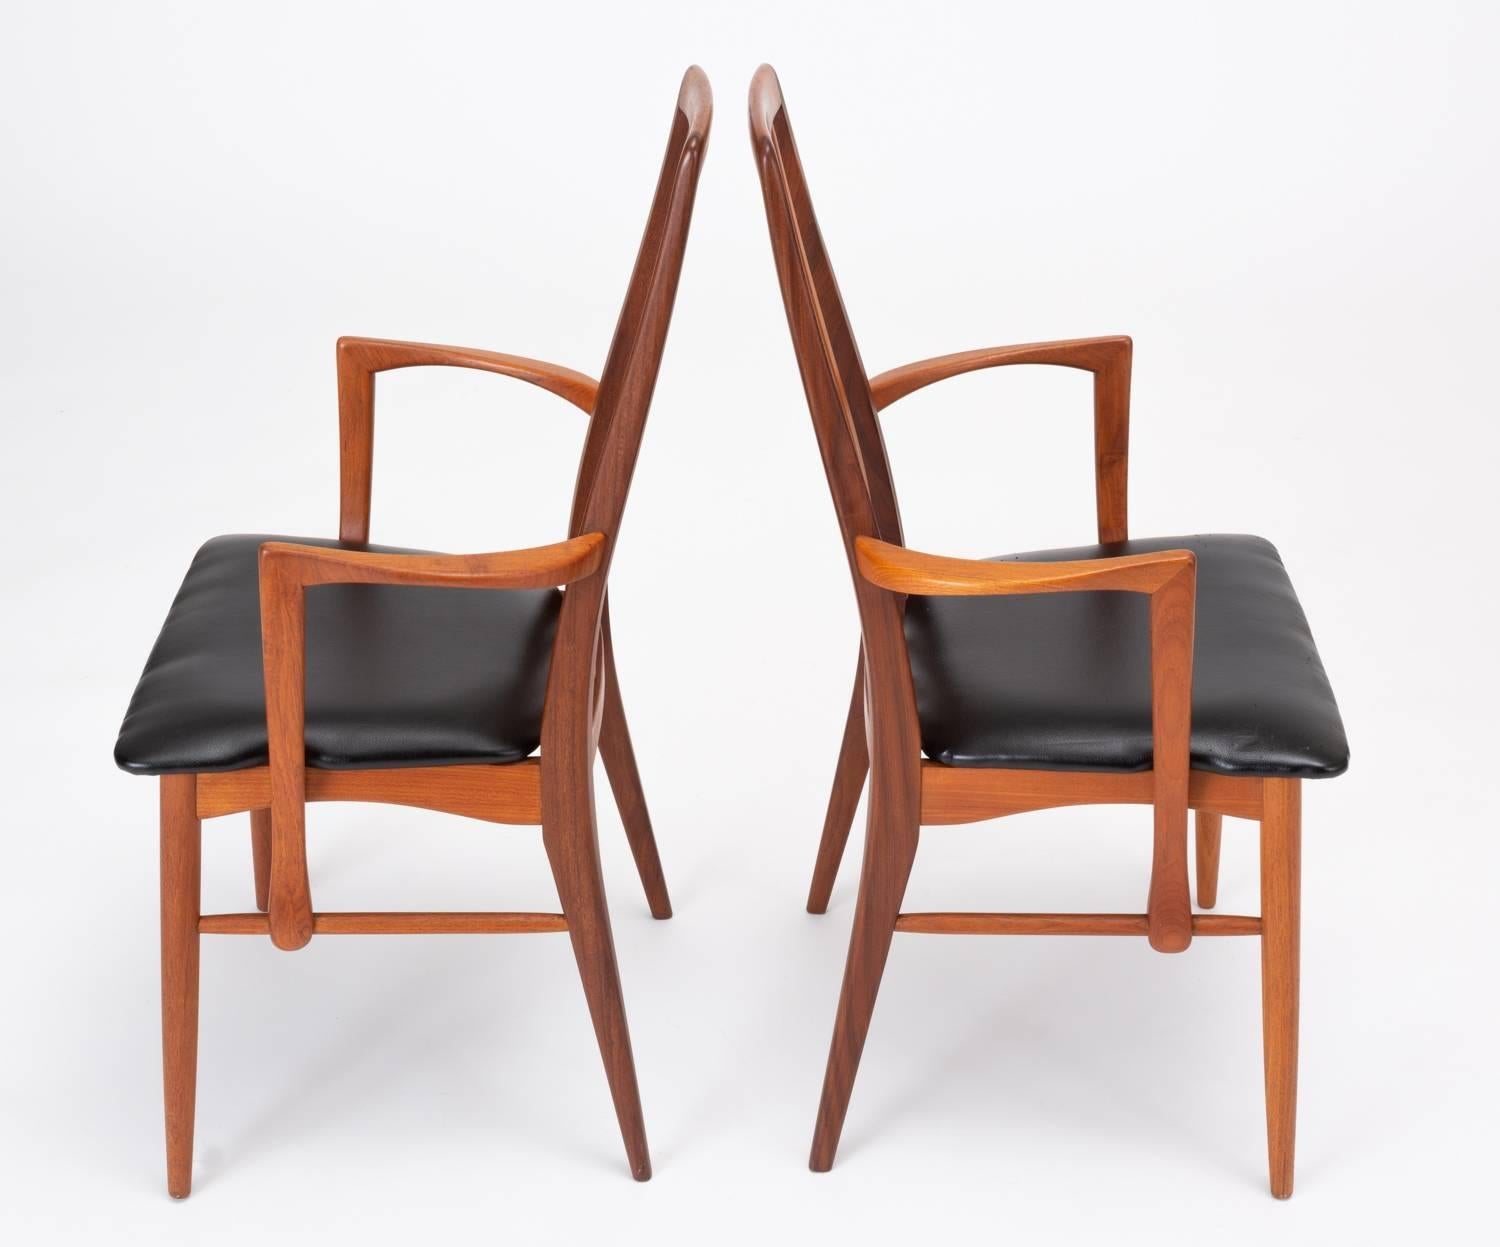 A pair of “Eva” Captain armchairs by Niels Koefoed for his family company, Koefoeds Mobelfabrik of Hornslet, Denmark. Designed in 1964, the Eva chair is defined by its sloped backrest and three vertical slats that conform to the curves of the frame.